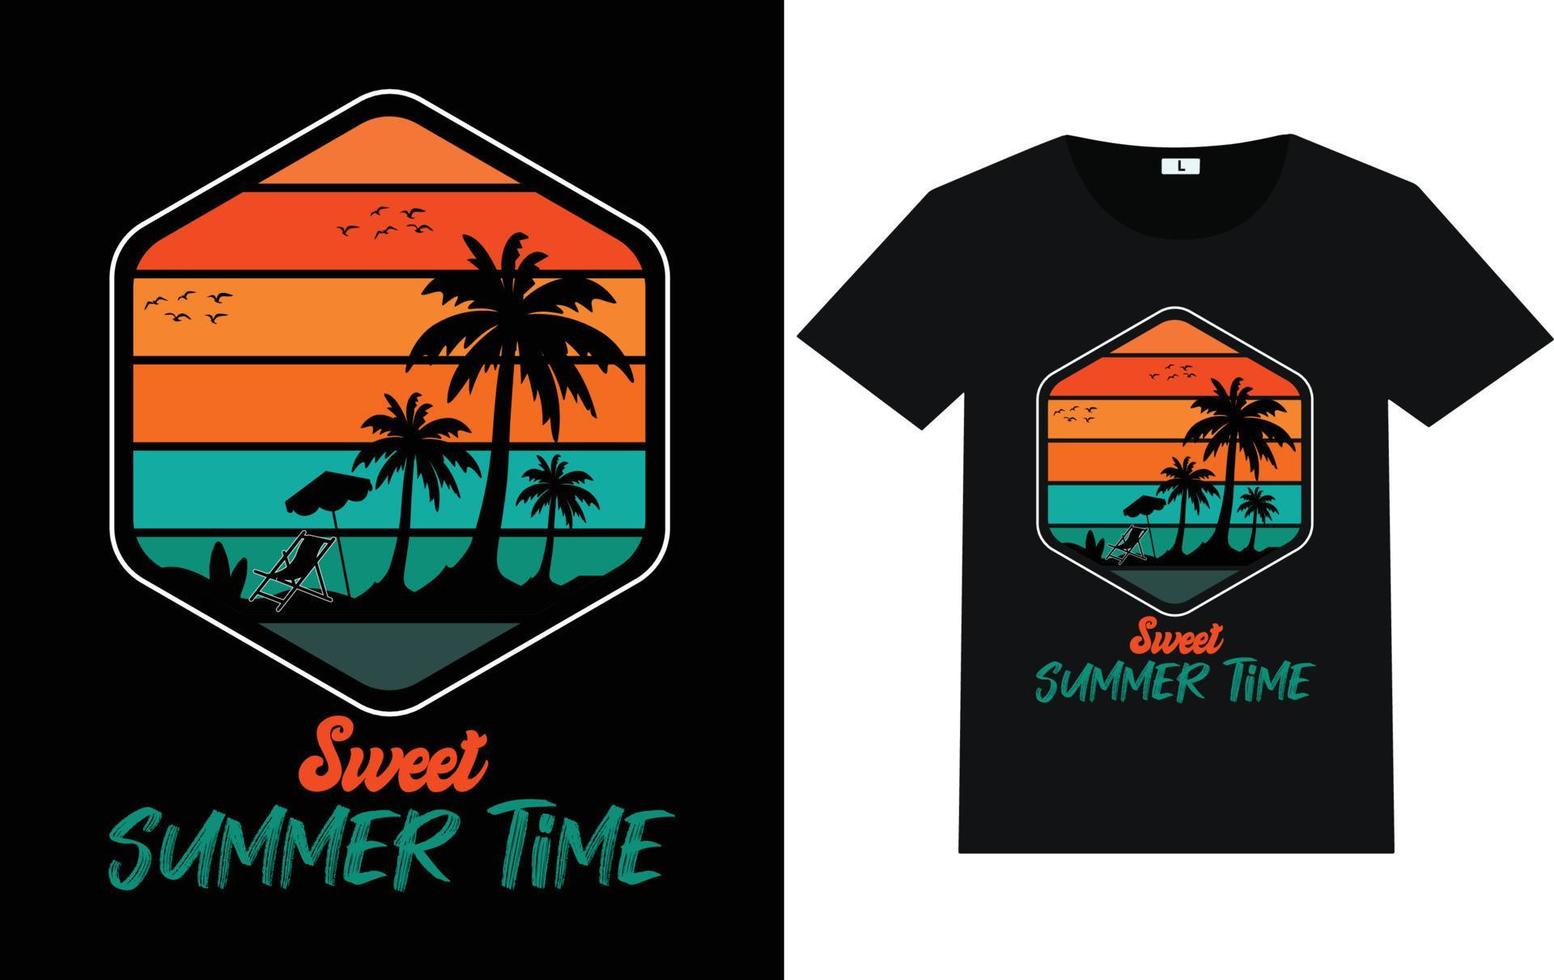 Summer Day Typography and Graphic T shirt Design vector